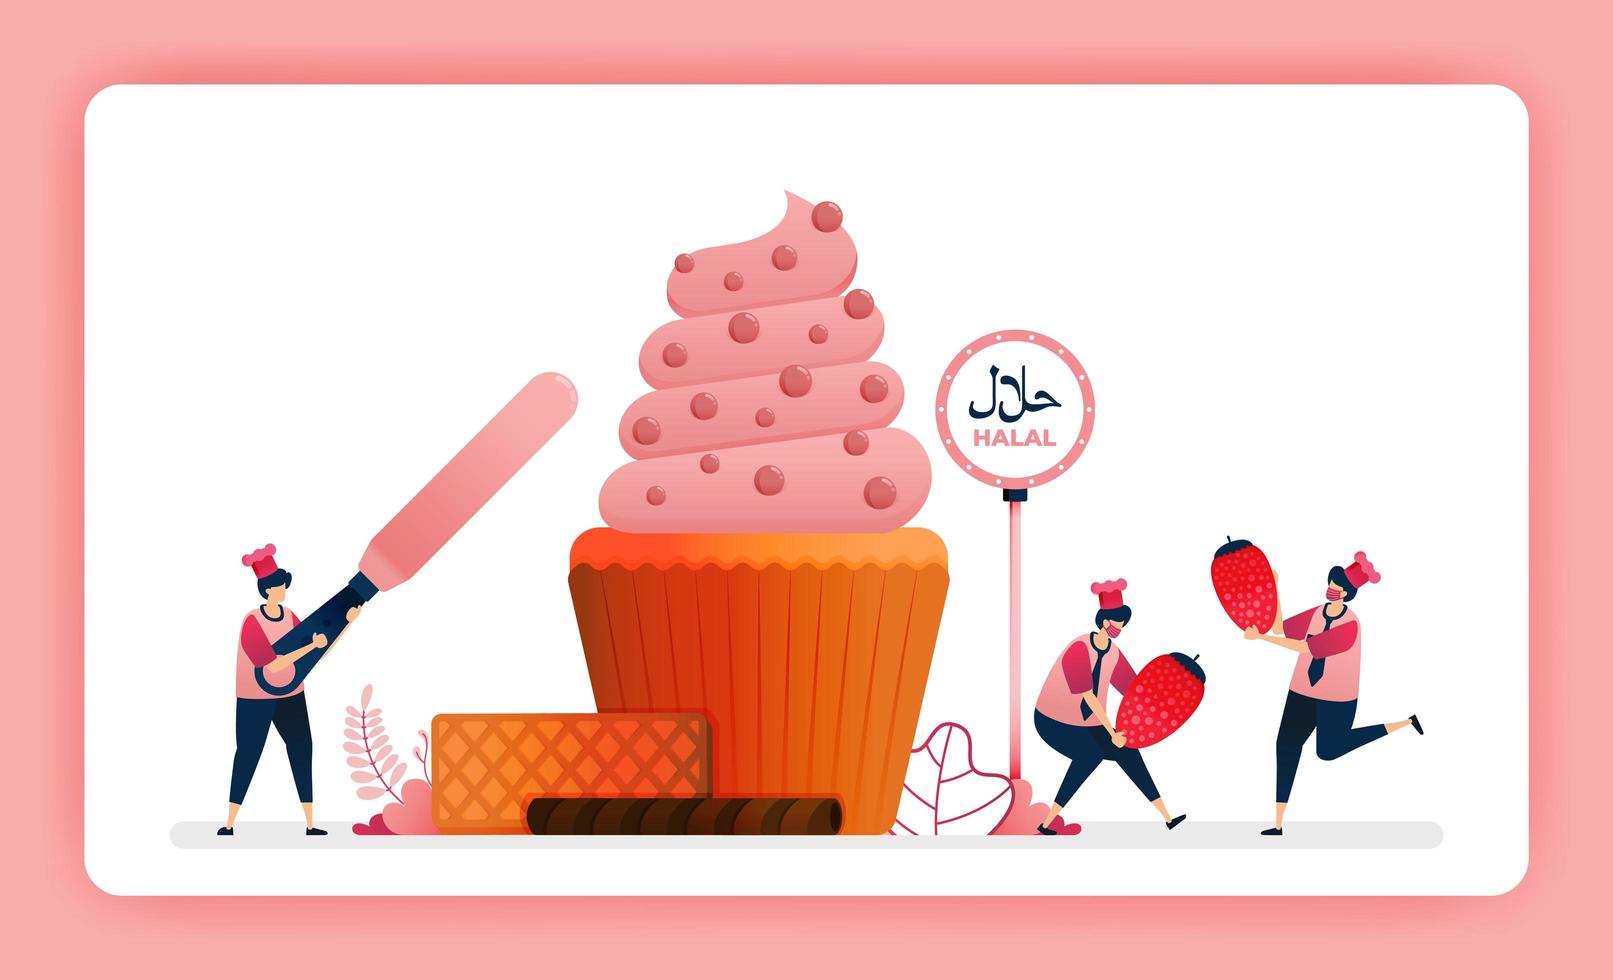 halal food menu illustration of sweet strawberry cupcake. Making muffins decorated with swirl icing and cocoa. Design can use For website, web, landing page, banner, mobile apps, UI UX, poster, flyer vector